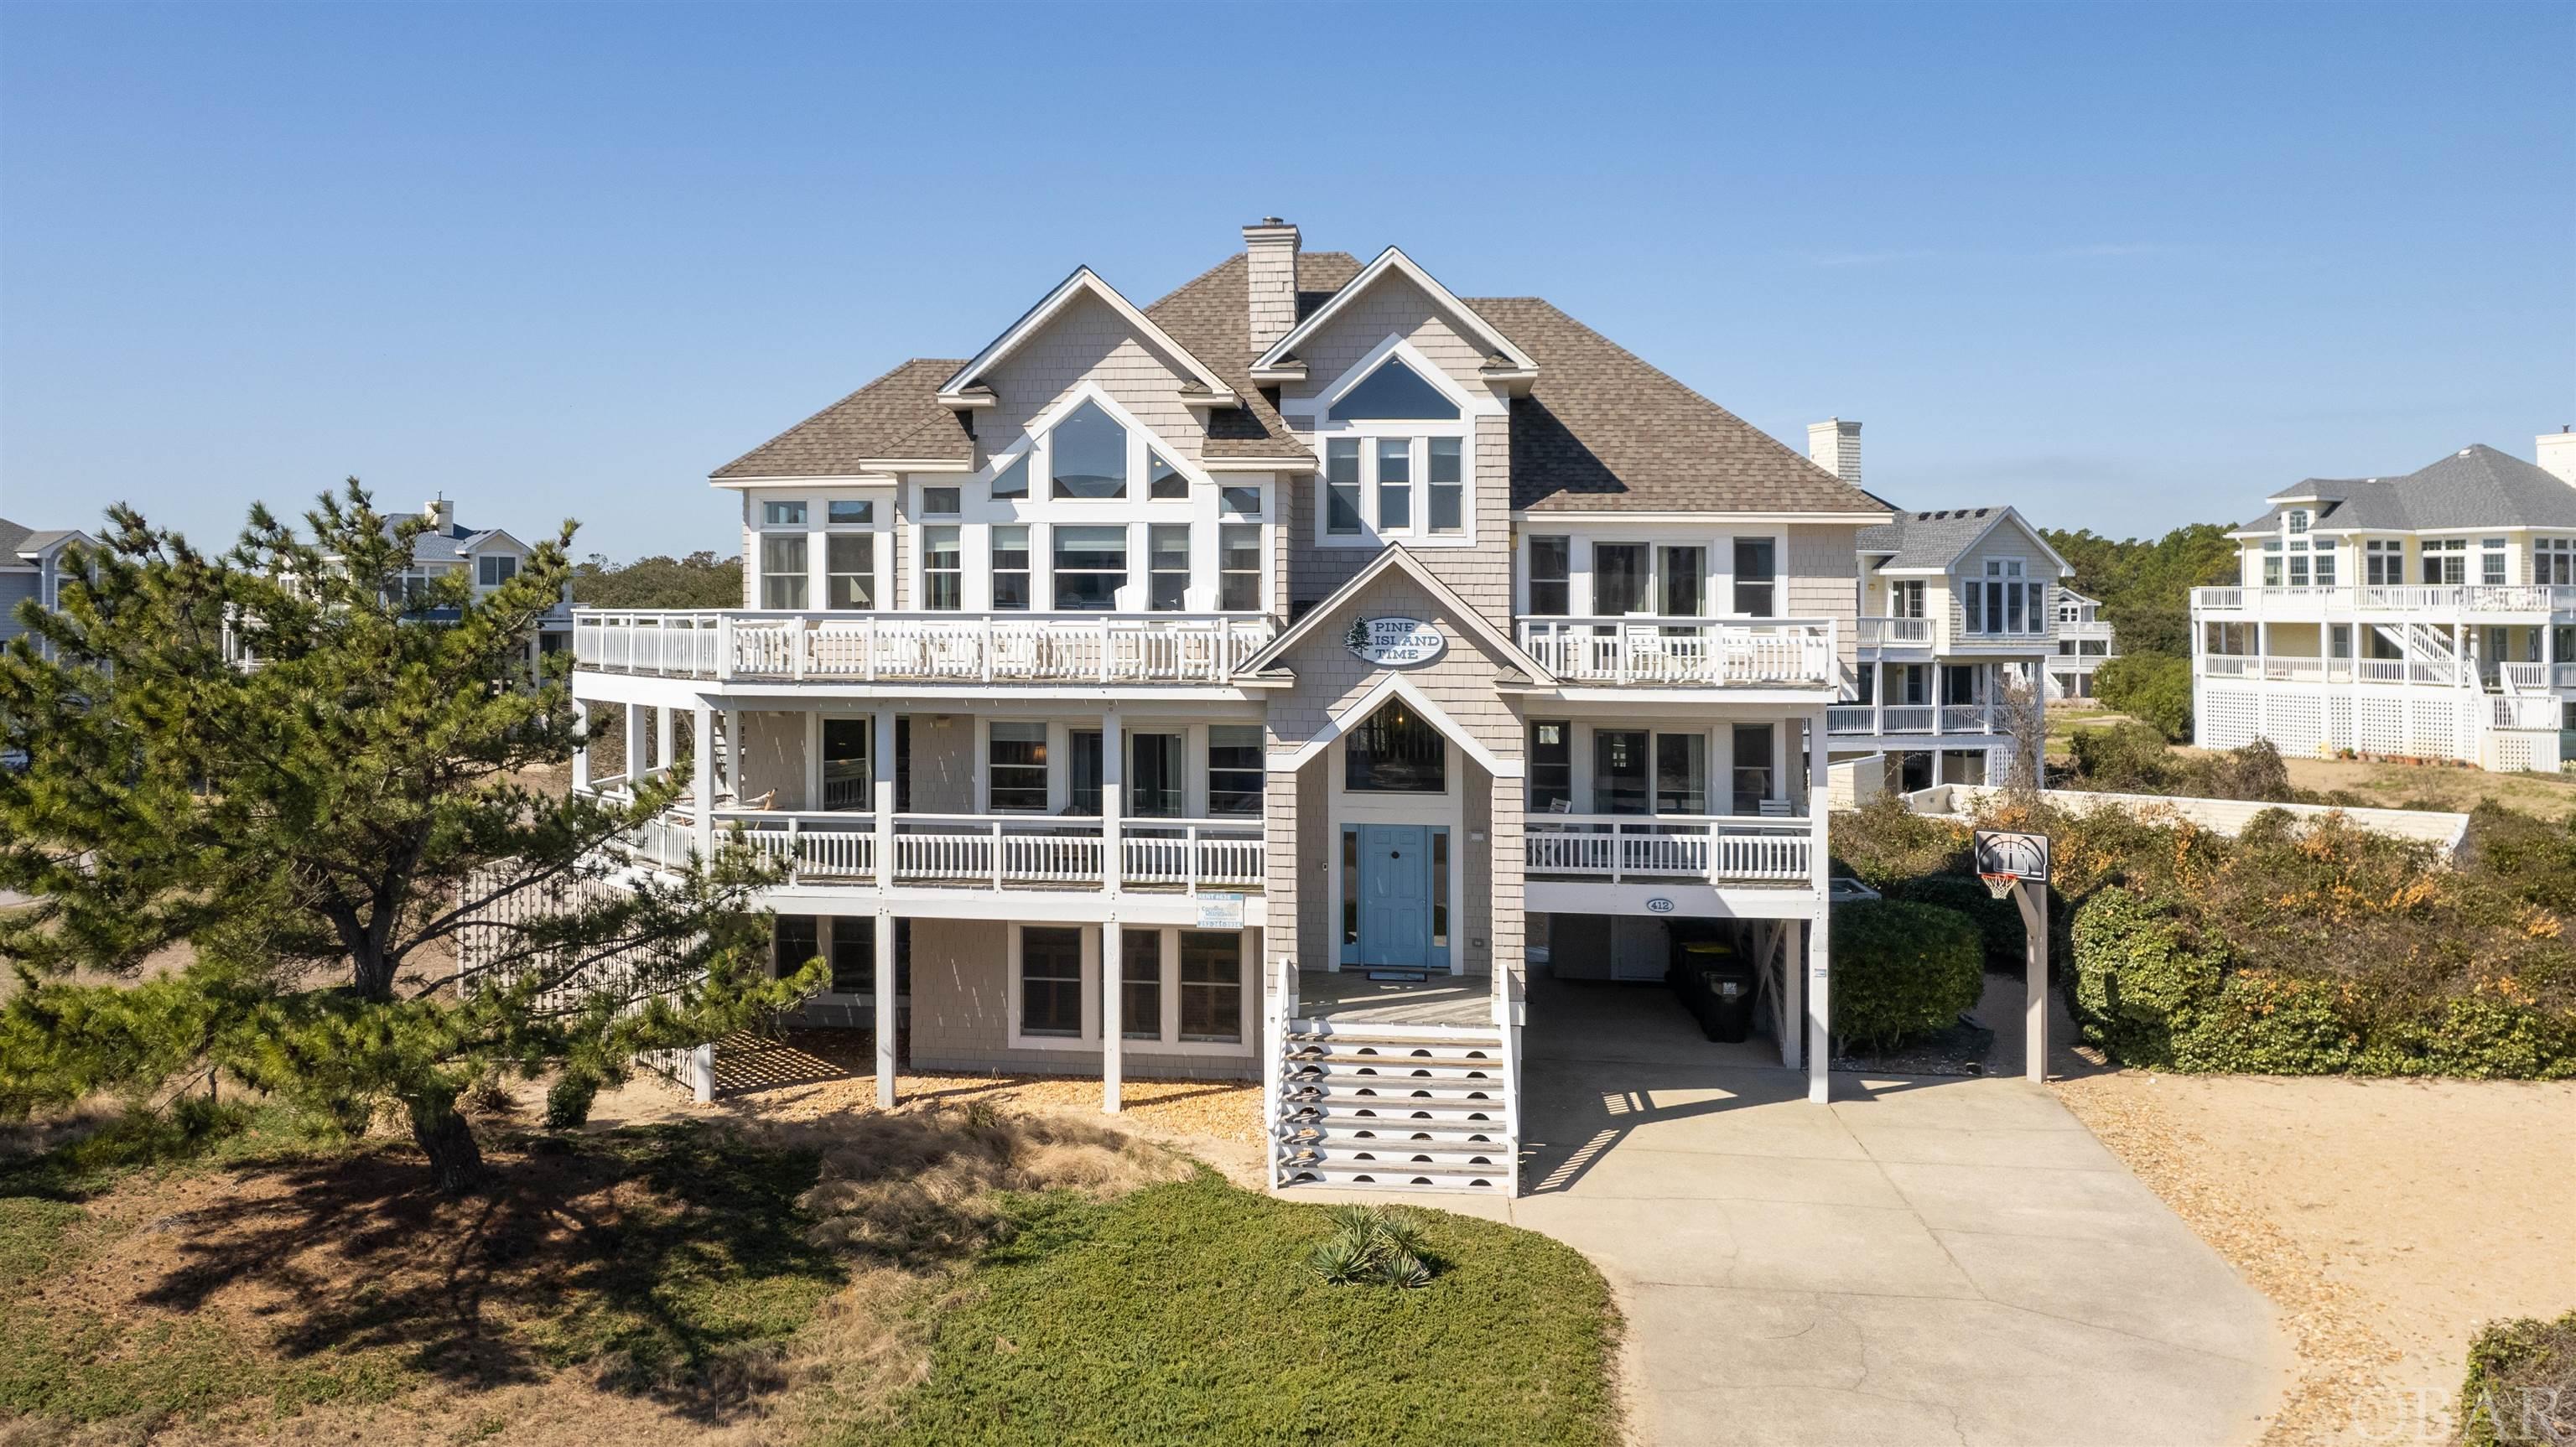 Welcome to 412 Deep Neck Road, a stunning semi-oceanfront retreat located in the renowned Pine Island community of Corolla, NC. Boasting views of the ocean, direct beach access steps away, a spacious corner parcel with added privacy, and gracious interior and exterior living spaces, this is a home and location you don't want to miss. In addition to 5 bedrooms, 5.5 baths, an elevator, laundry room with two washers and dryers, and a volleyball court, the home features a second level den, game room with pool/ping pong table, high top seating, and wet bar for added entertainment. An open concept living room with surrounding windows, hardwood floors, and a gas fireplace, both island and dining seating, a sunroom, ship's watch, and kitchen with dual stainless appliances, a standalone ice maker, and granite countertops was thoughtfully designed for hosting large groups of friends and family. A private heated pool and spa, two outdoor showers, a fish cleaning station, and exterior 1/2 bath, offers the perfect set up for comfort and convenience after days spent on the wide white sandy beaches of Corolla. While offering a peaceful and secluded ambiance from all the Island's action, the drive or bike ride to town takes less than 10 minutes where you can indulge in a number of terrific local shops, restaurants, and attractions to include the Historic Whalehead Club and Currituck Beach Lighthouse. Enjoy the extensive community amenity list offered in Pine Island from the community pool, playground, tennis and basketball courts, and health club for an additional fee.